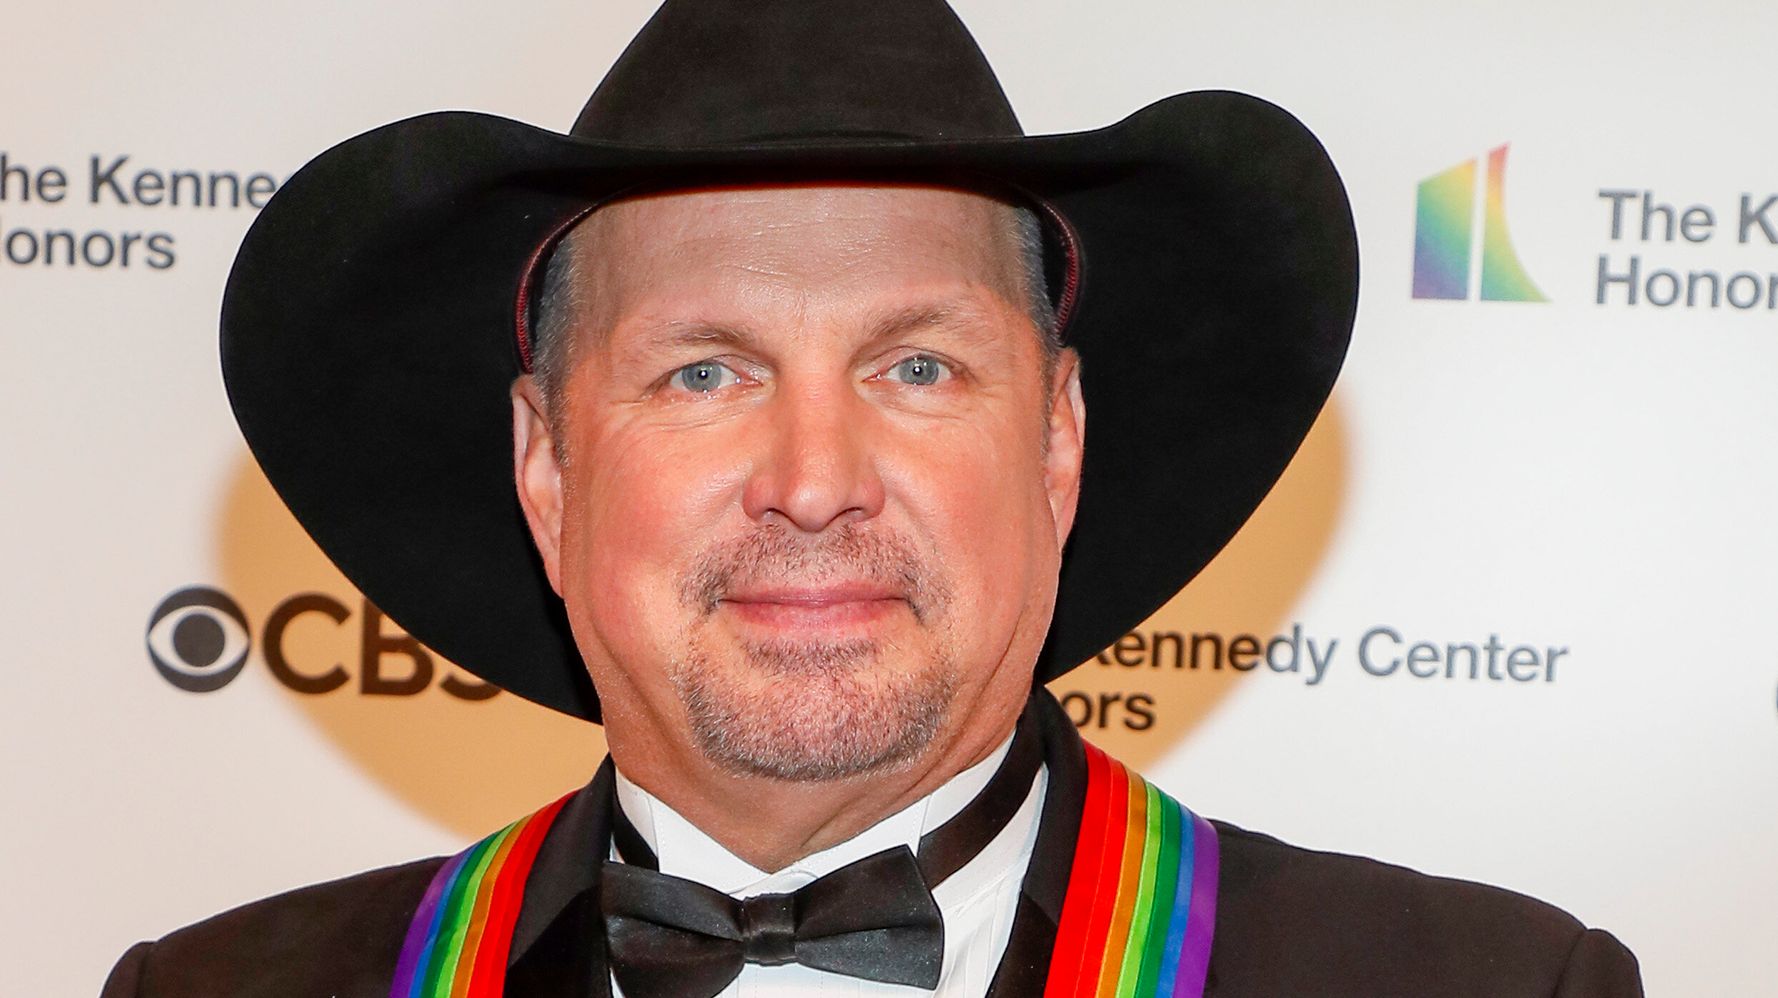 Garth Brooks Scales Down Shows Due To COVID-19: ‘Stadiums Are Officially Out'